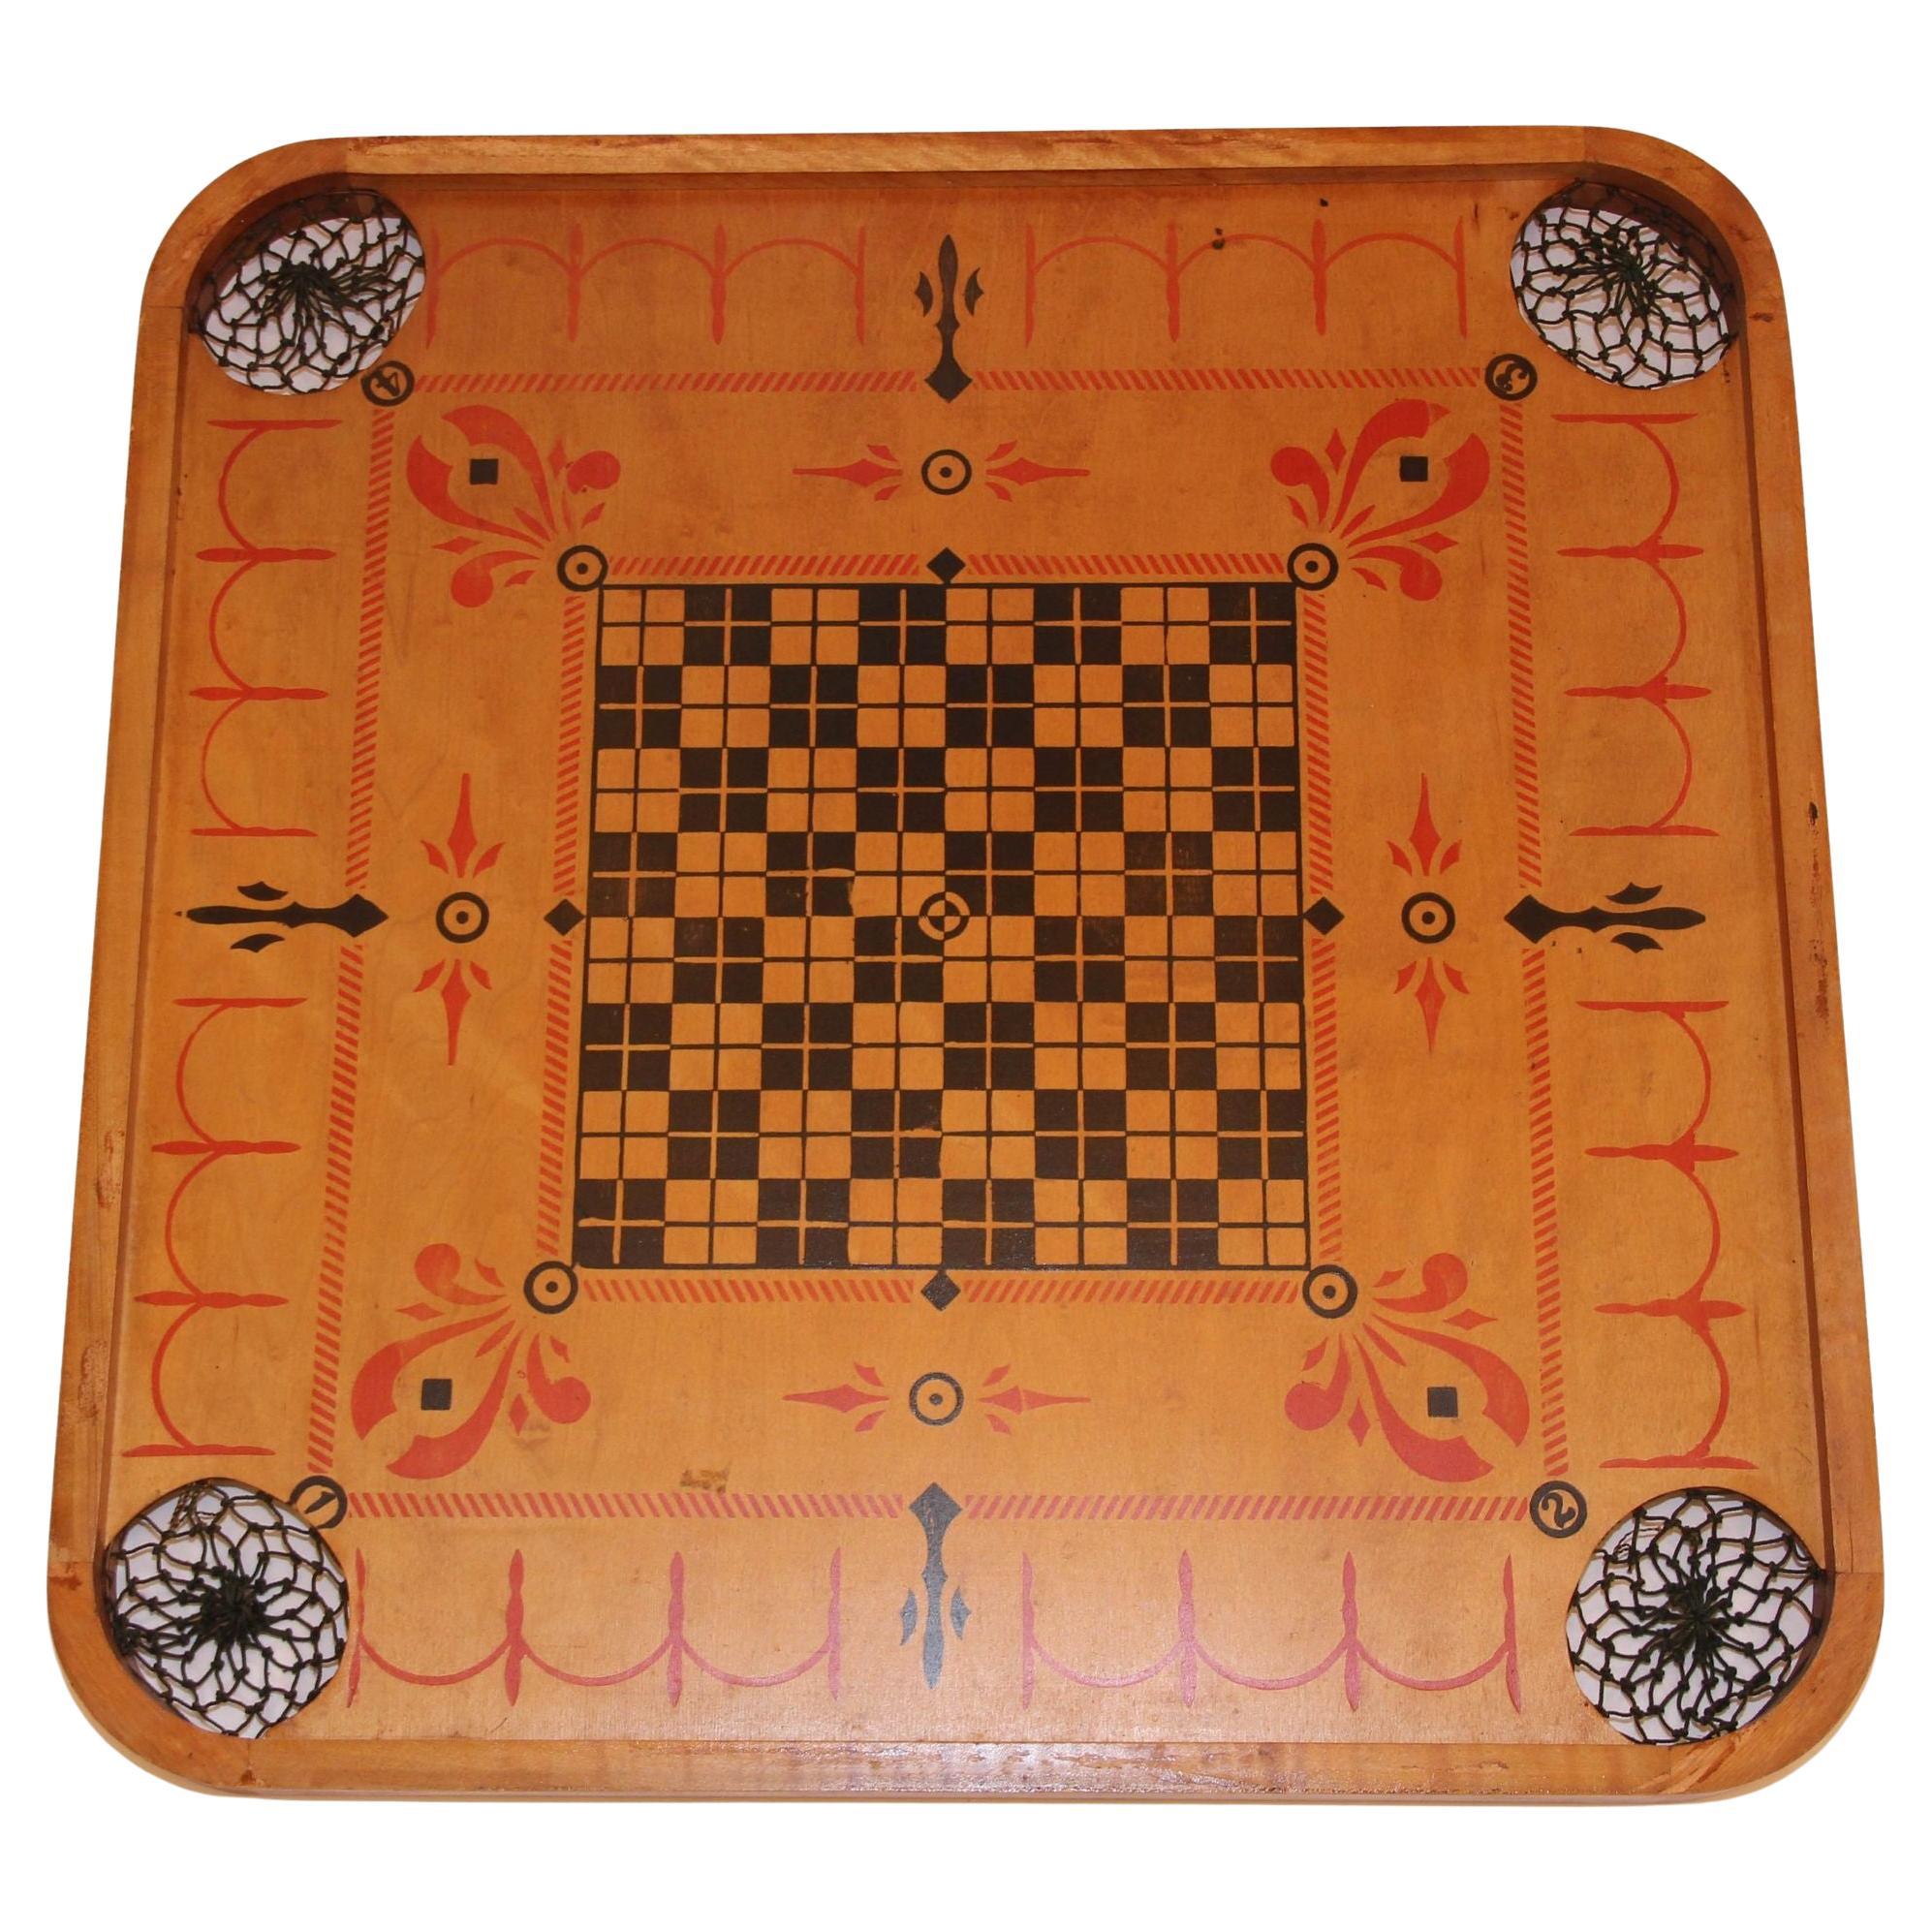 Antique Carrom Large Wooden Game Board Double-Sided No. 1 Archarena Style 'E'